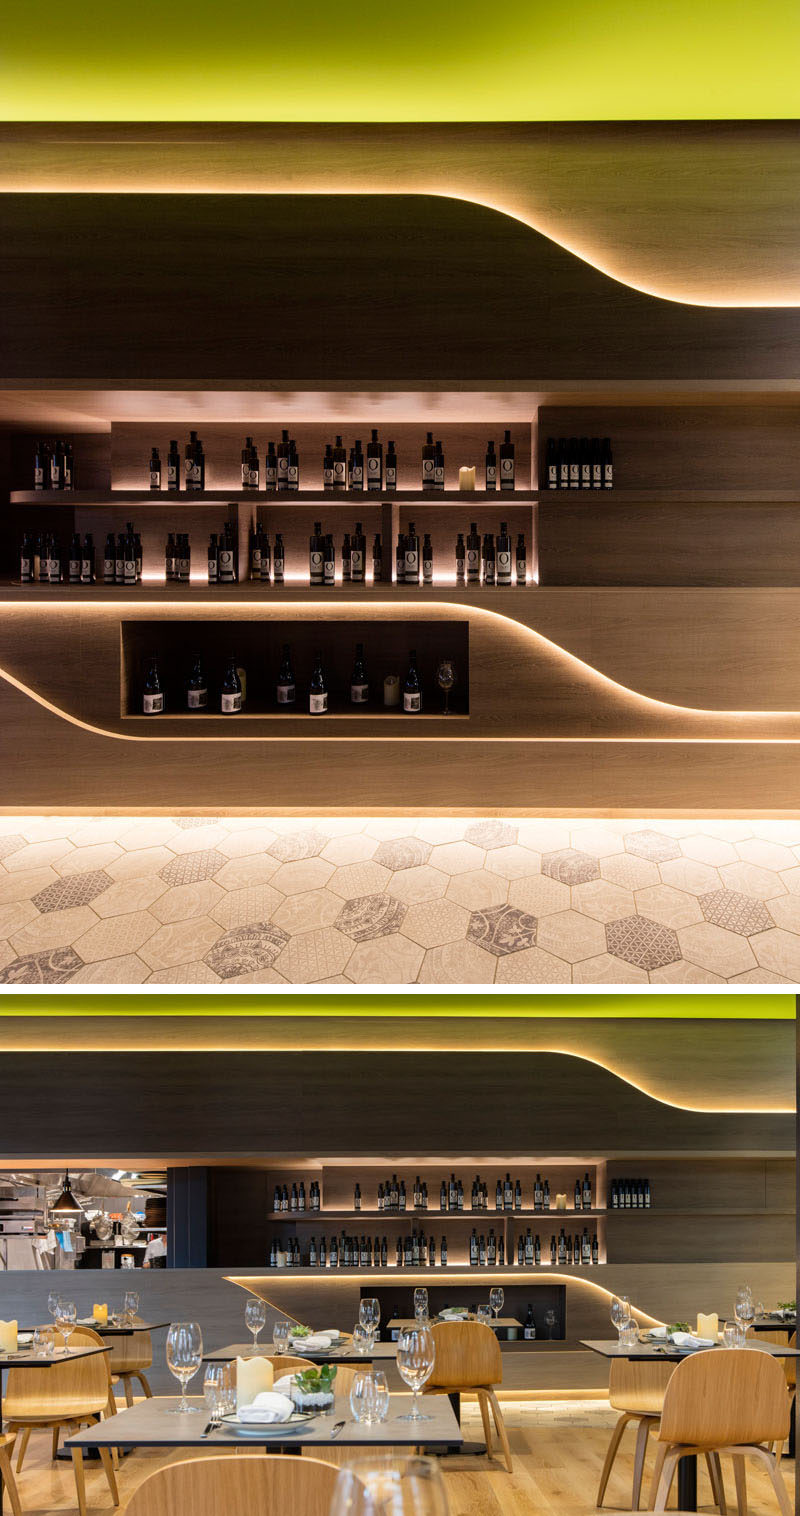 Design firm LAVA have designed Olio, a Sicilian restaurant in Sydney, that uses recessed LED lights to highlight various areas throughout the restaurant and create a nice warm modern glow.